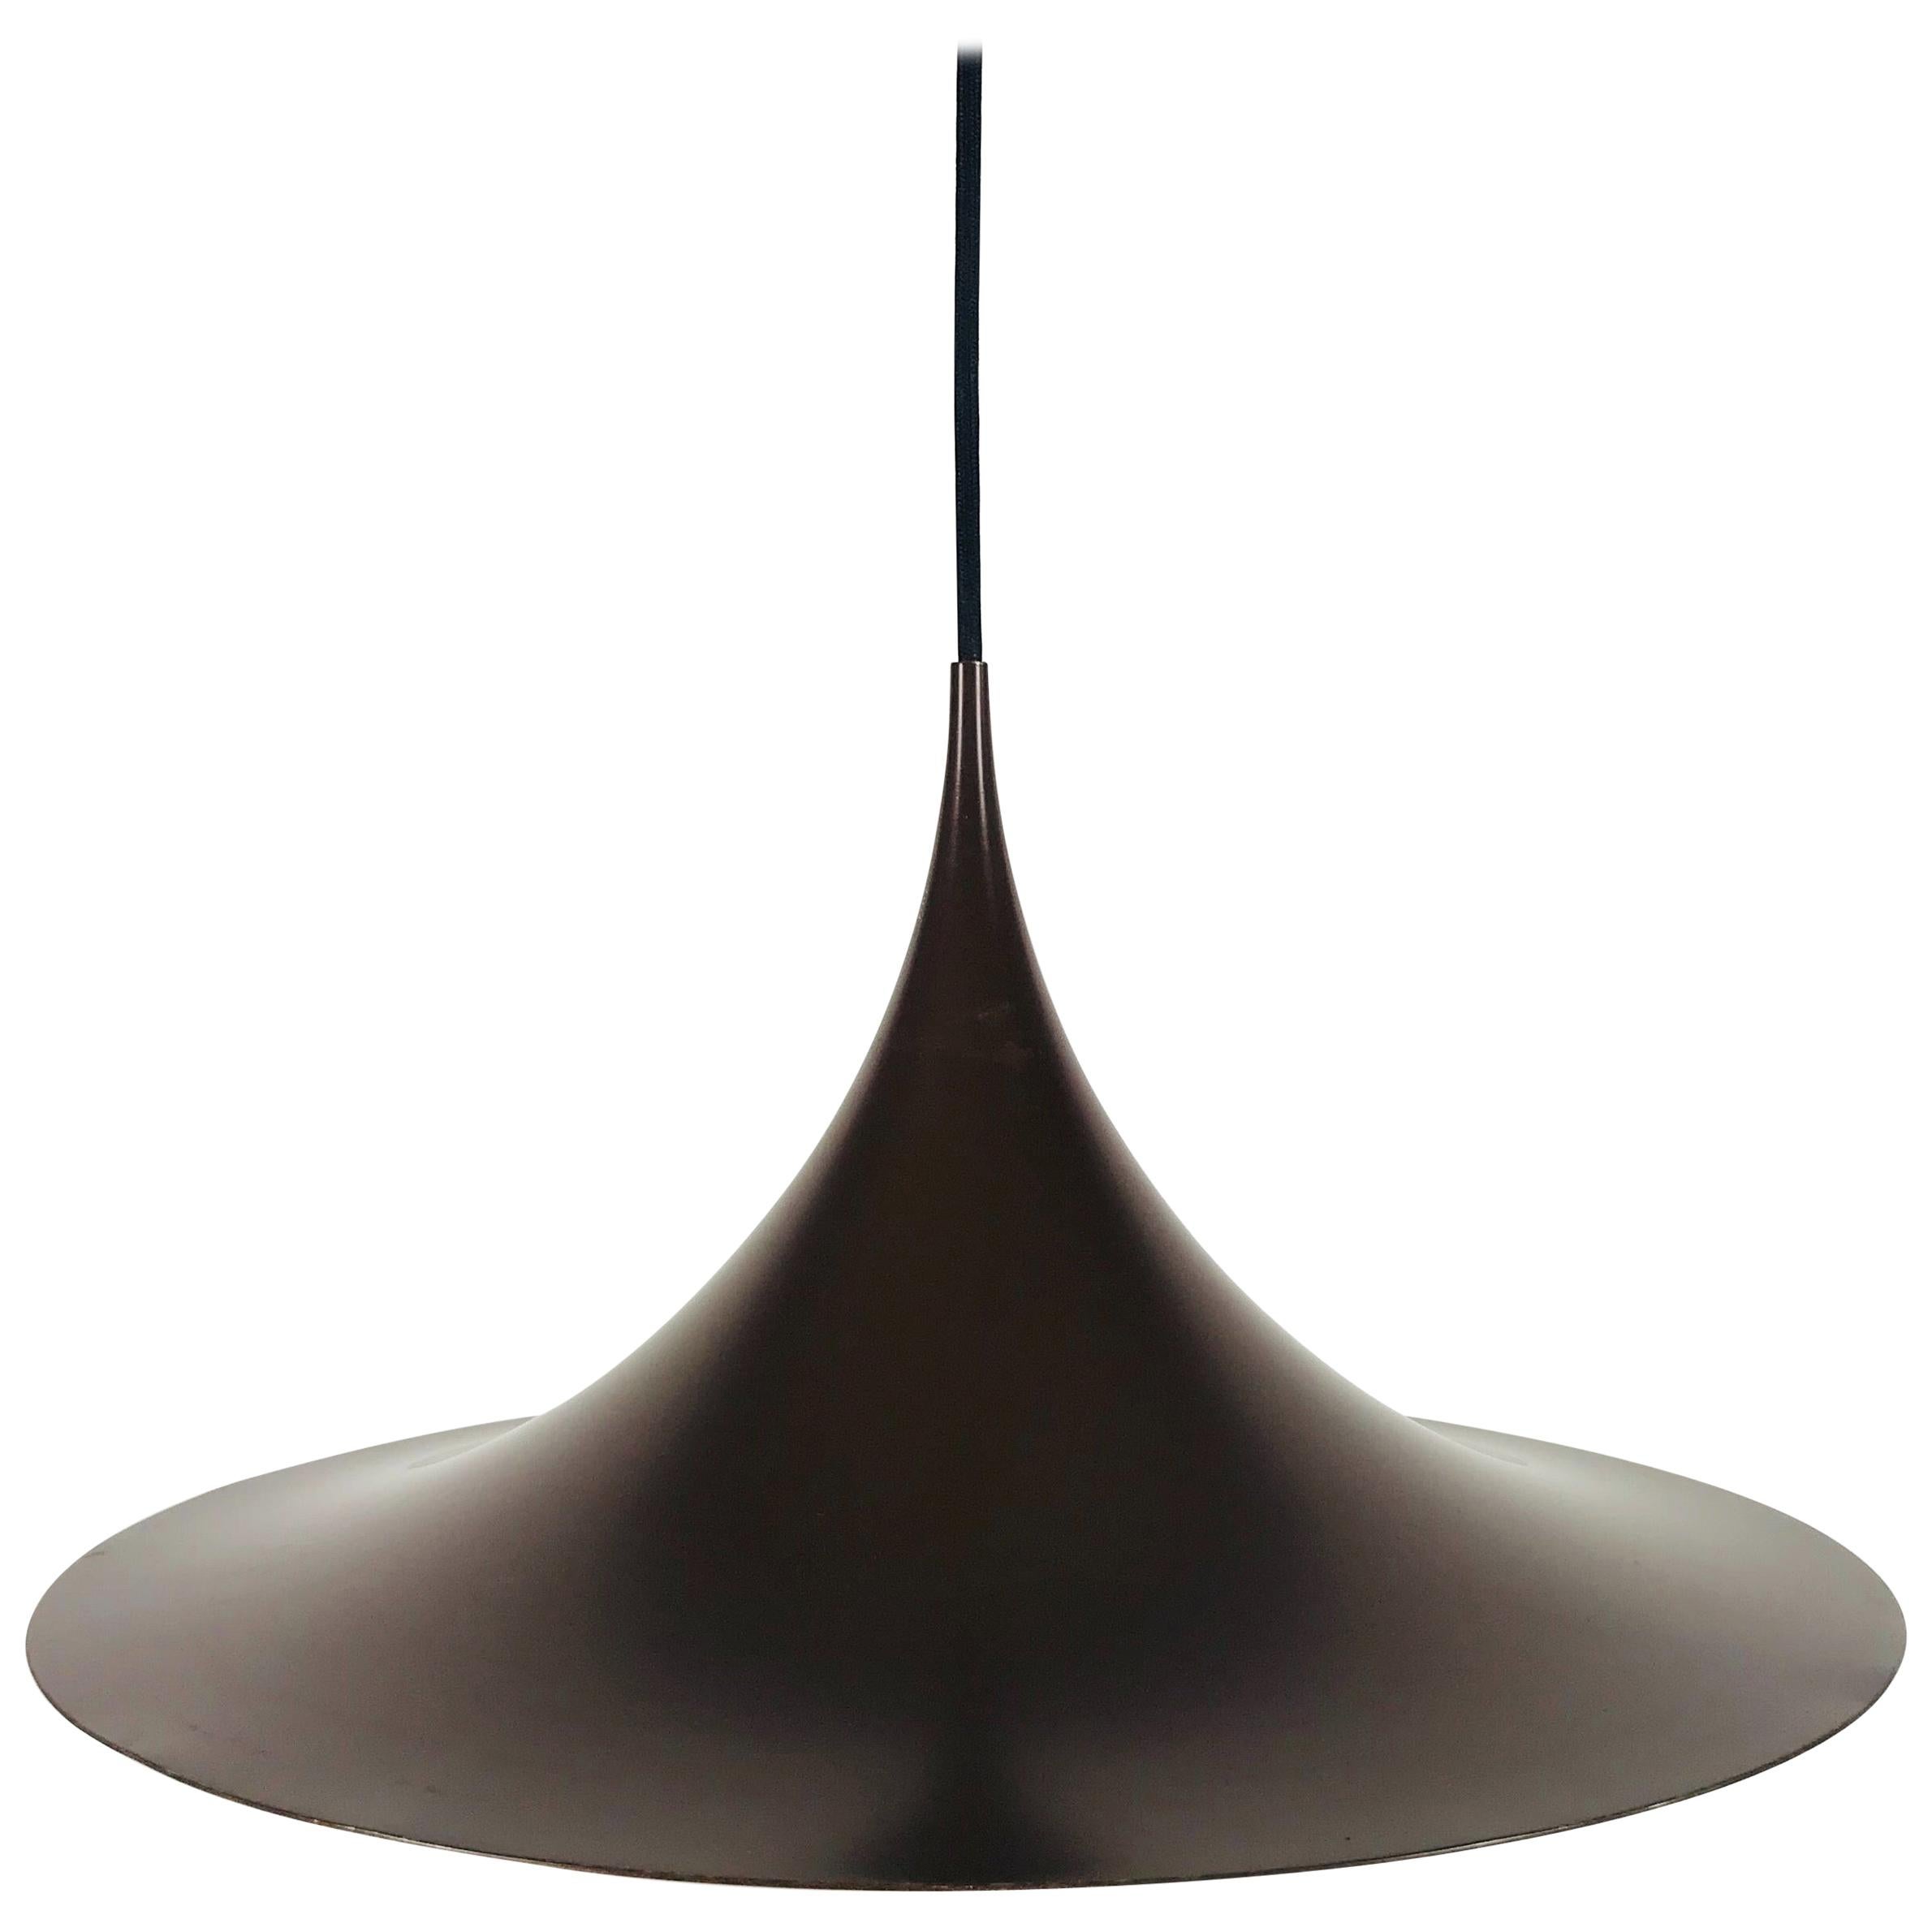 Brown Round Pendant Lamp by Fog & Mørup, 1970s